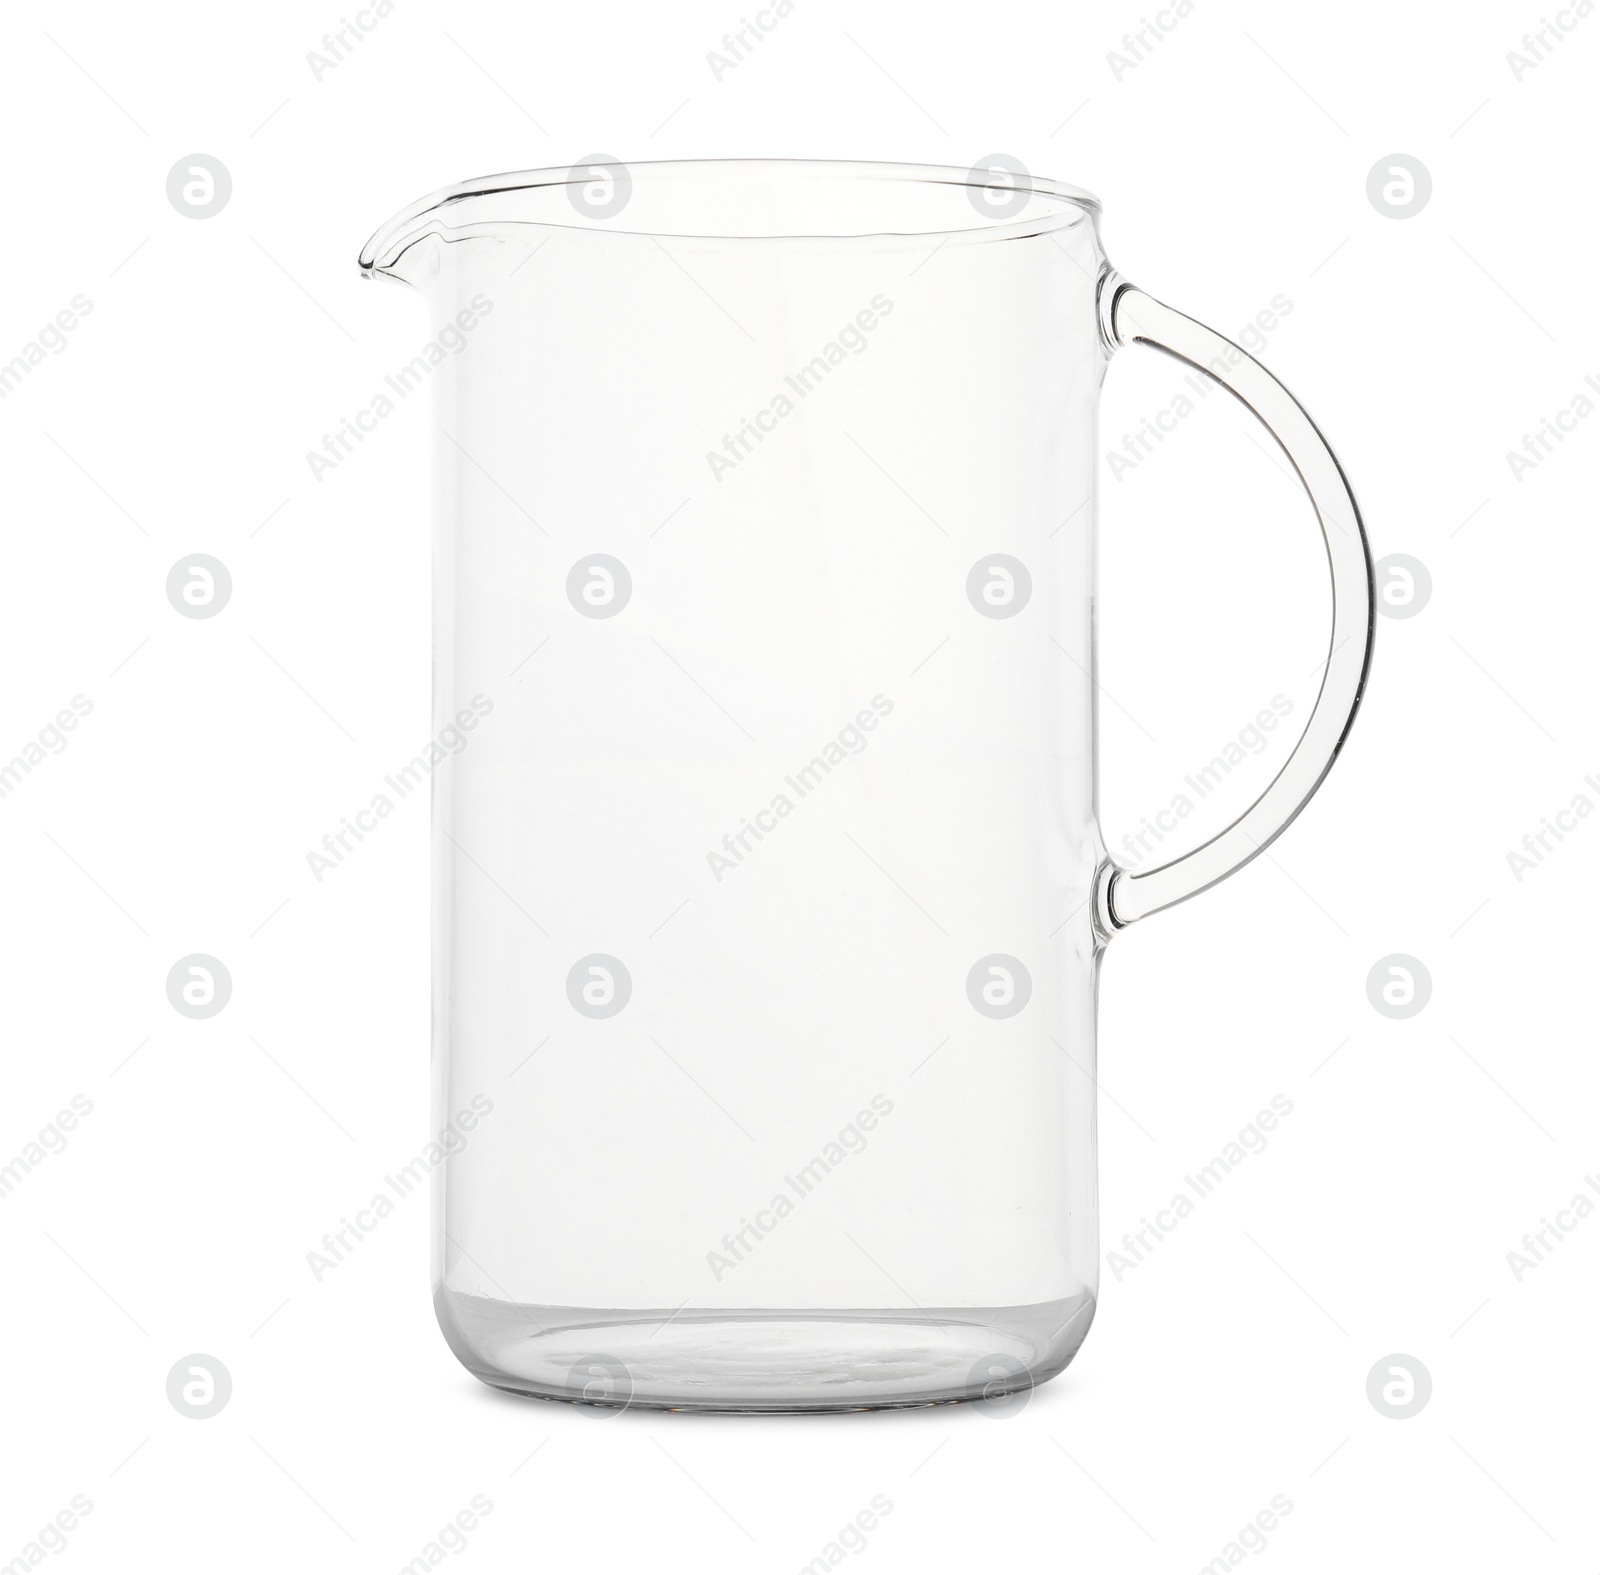 Photo of One empty glass jug isolated on white